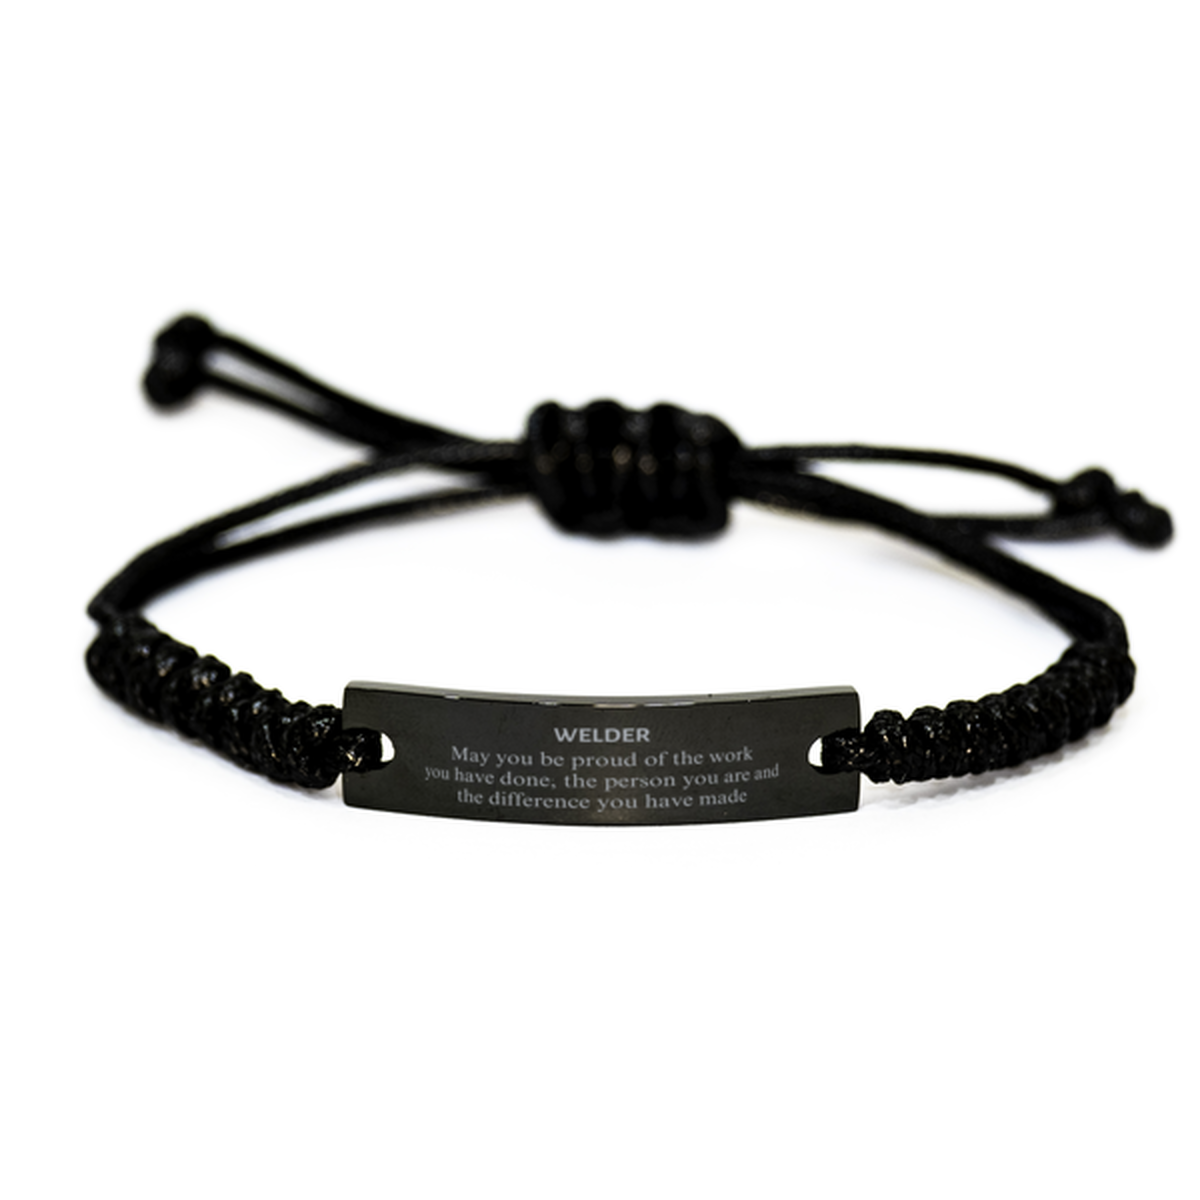 Welder May you be proud of the work you have done, Retirement Welder Black Rope Bracelet for Colleague Appreciation Gifts Amazing for Welder